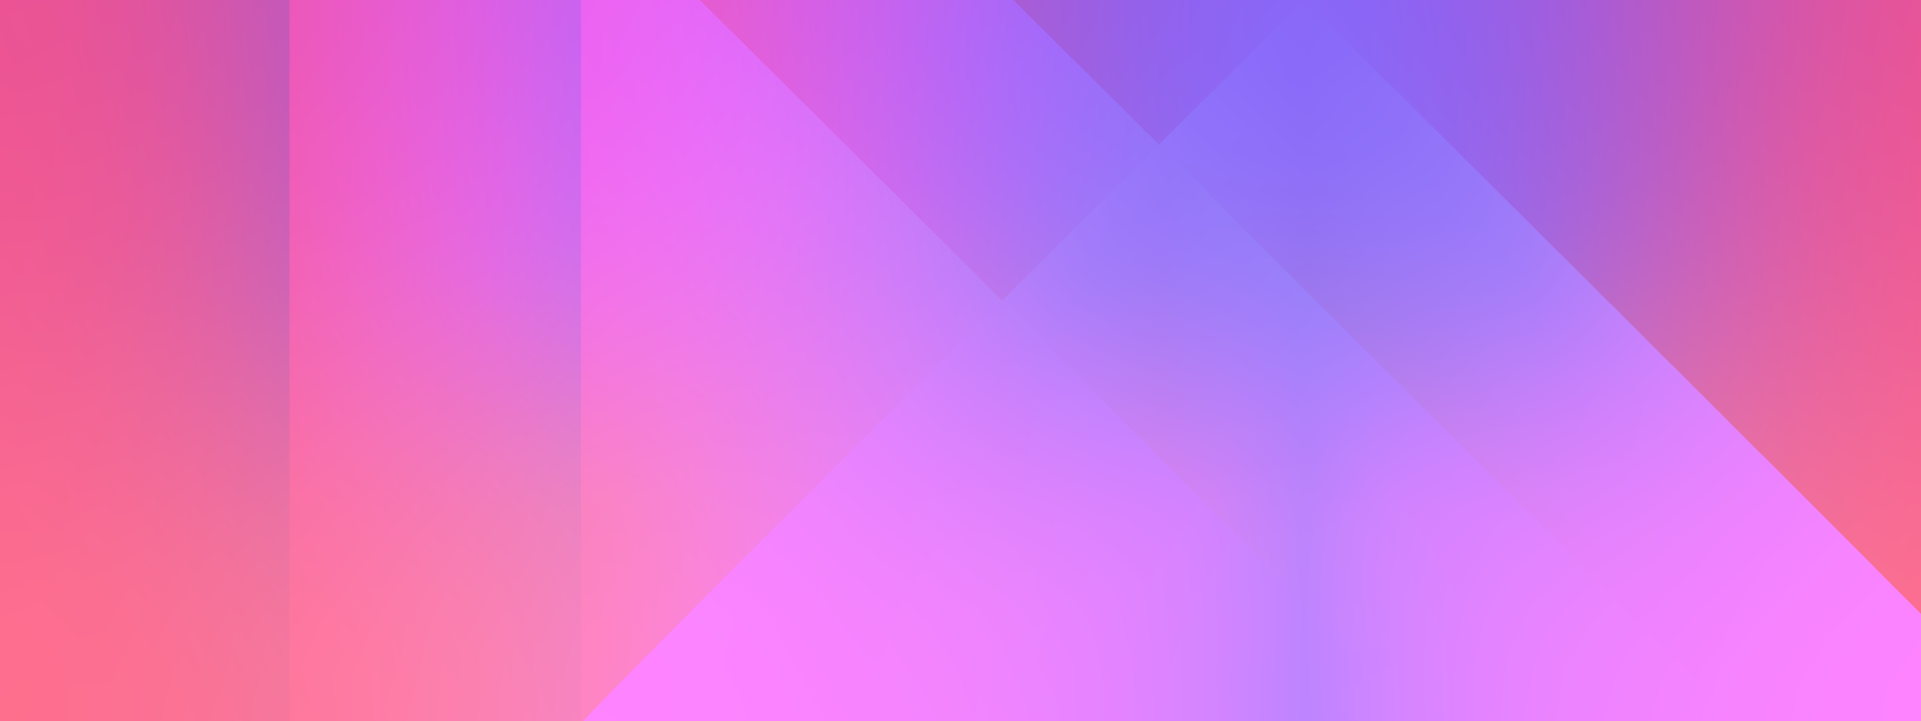 background pattern in hues of purple and blue